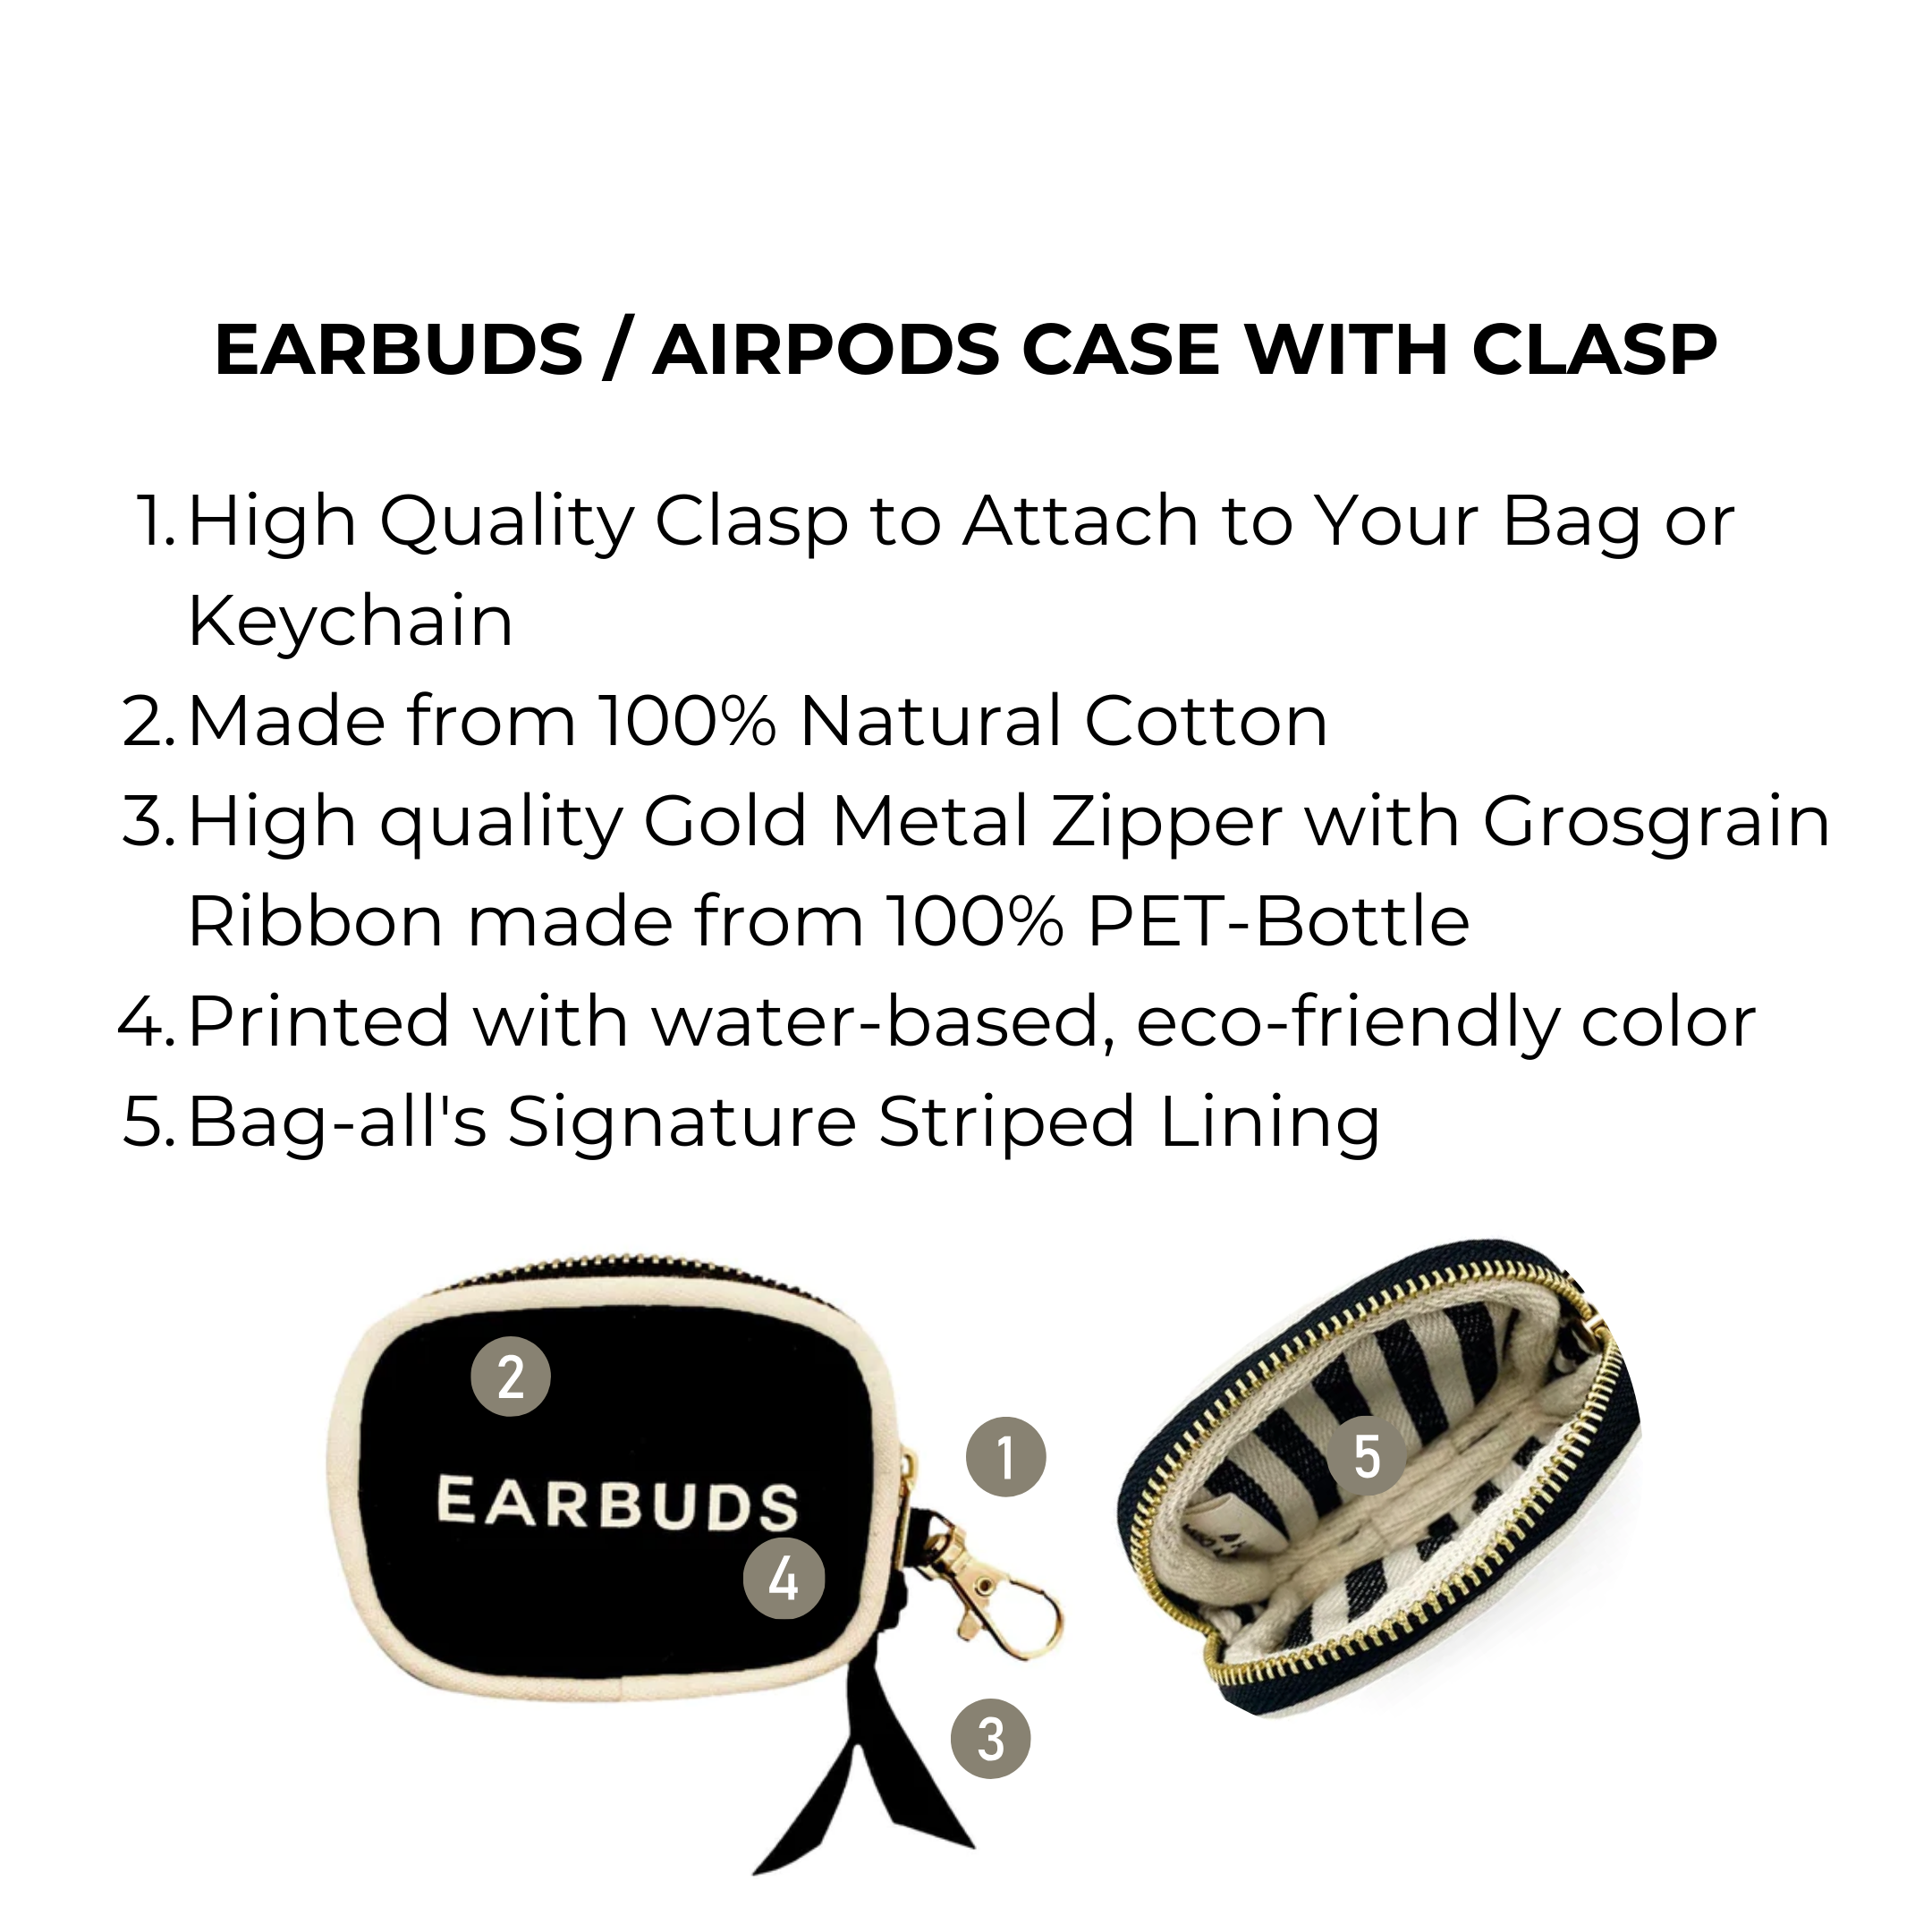 Earbuds/Airpods Case with Clasp, Black | Bag-all